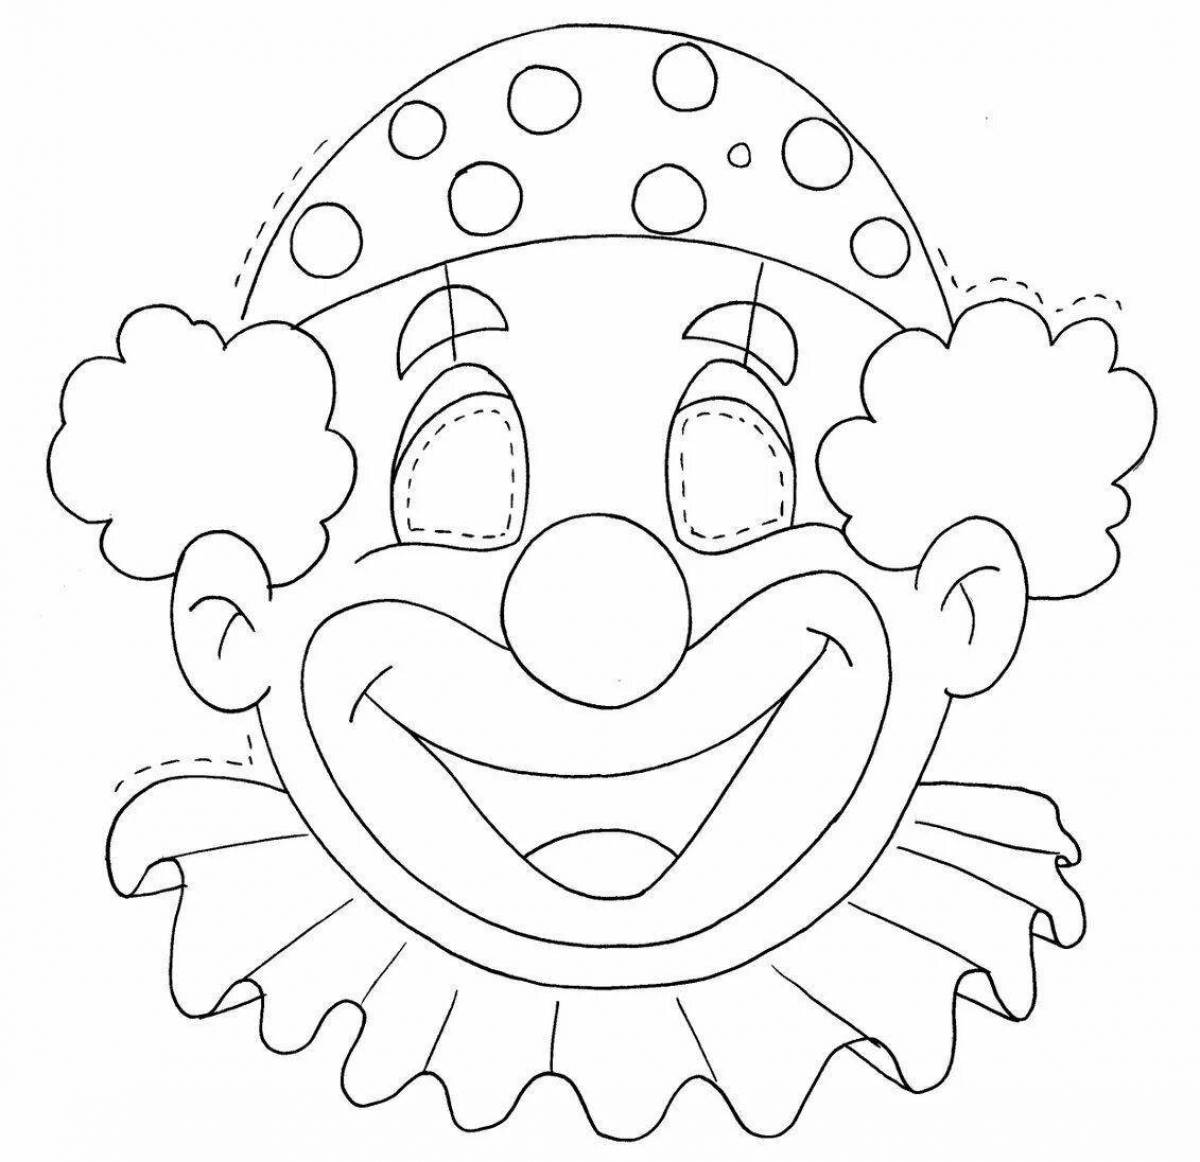 Colorful clown mask coloring book